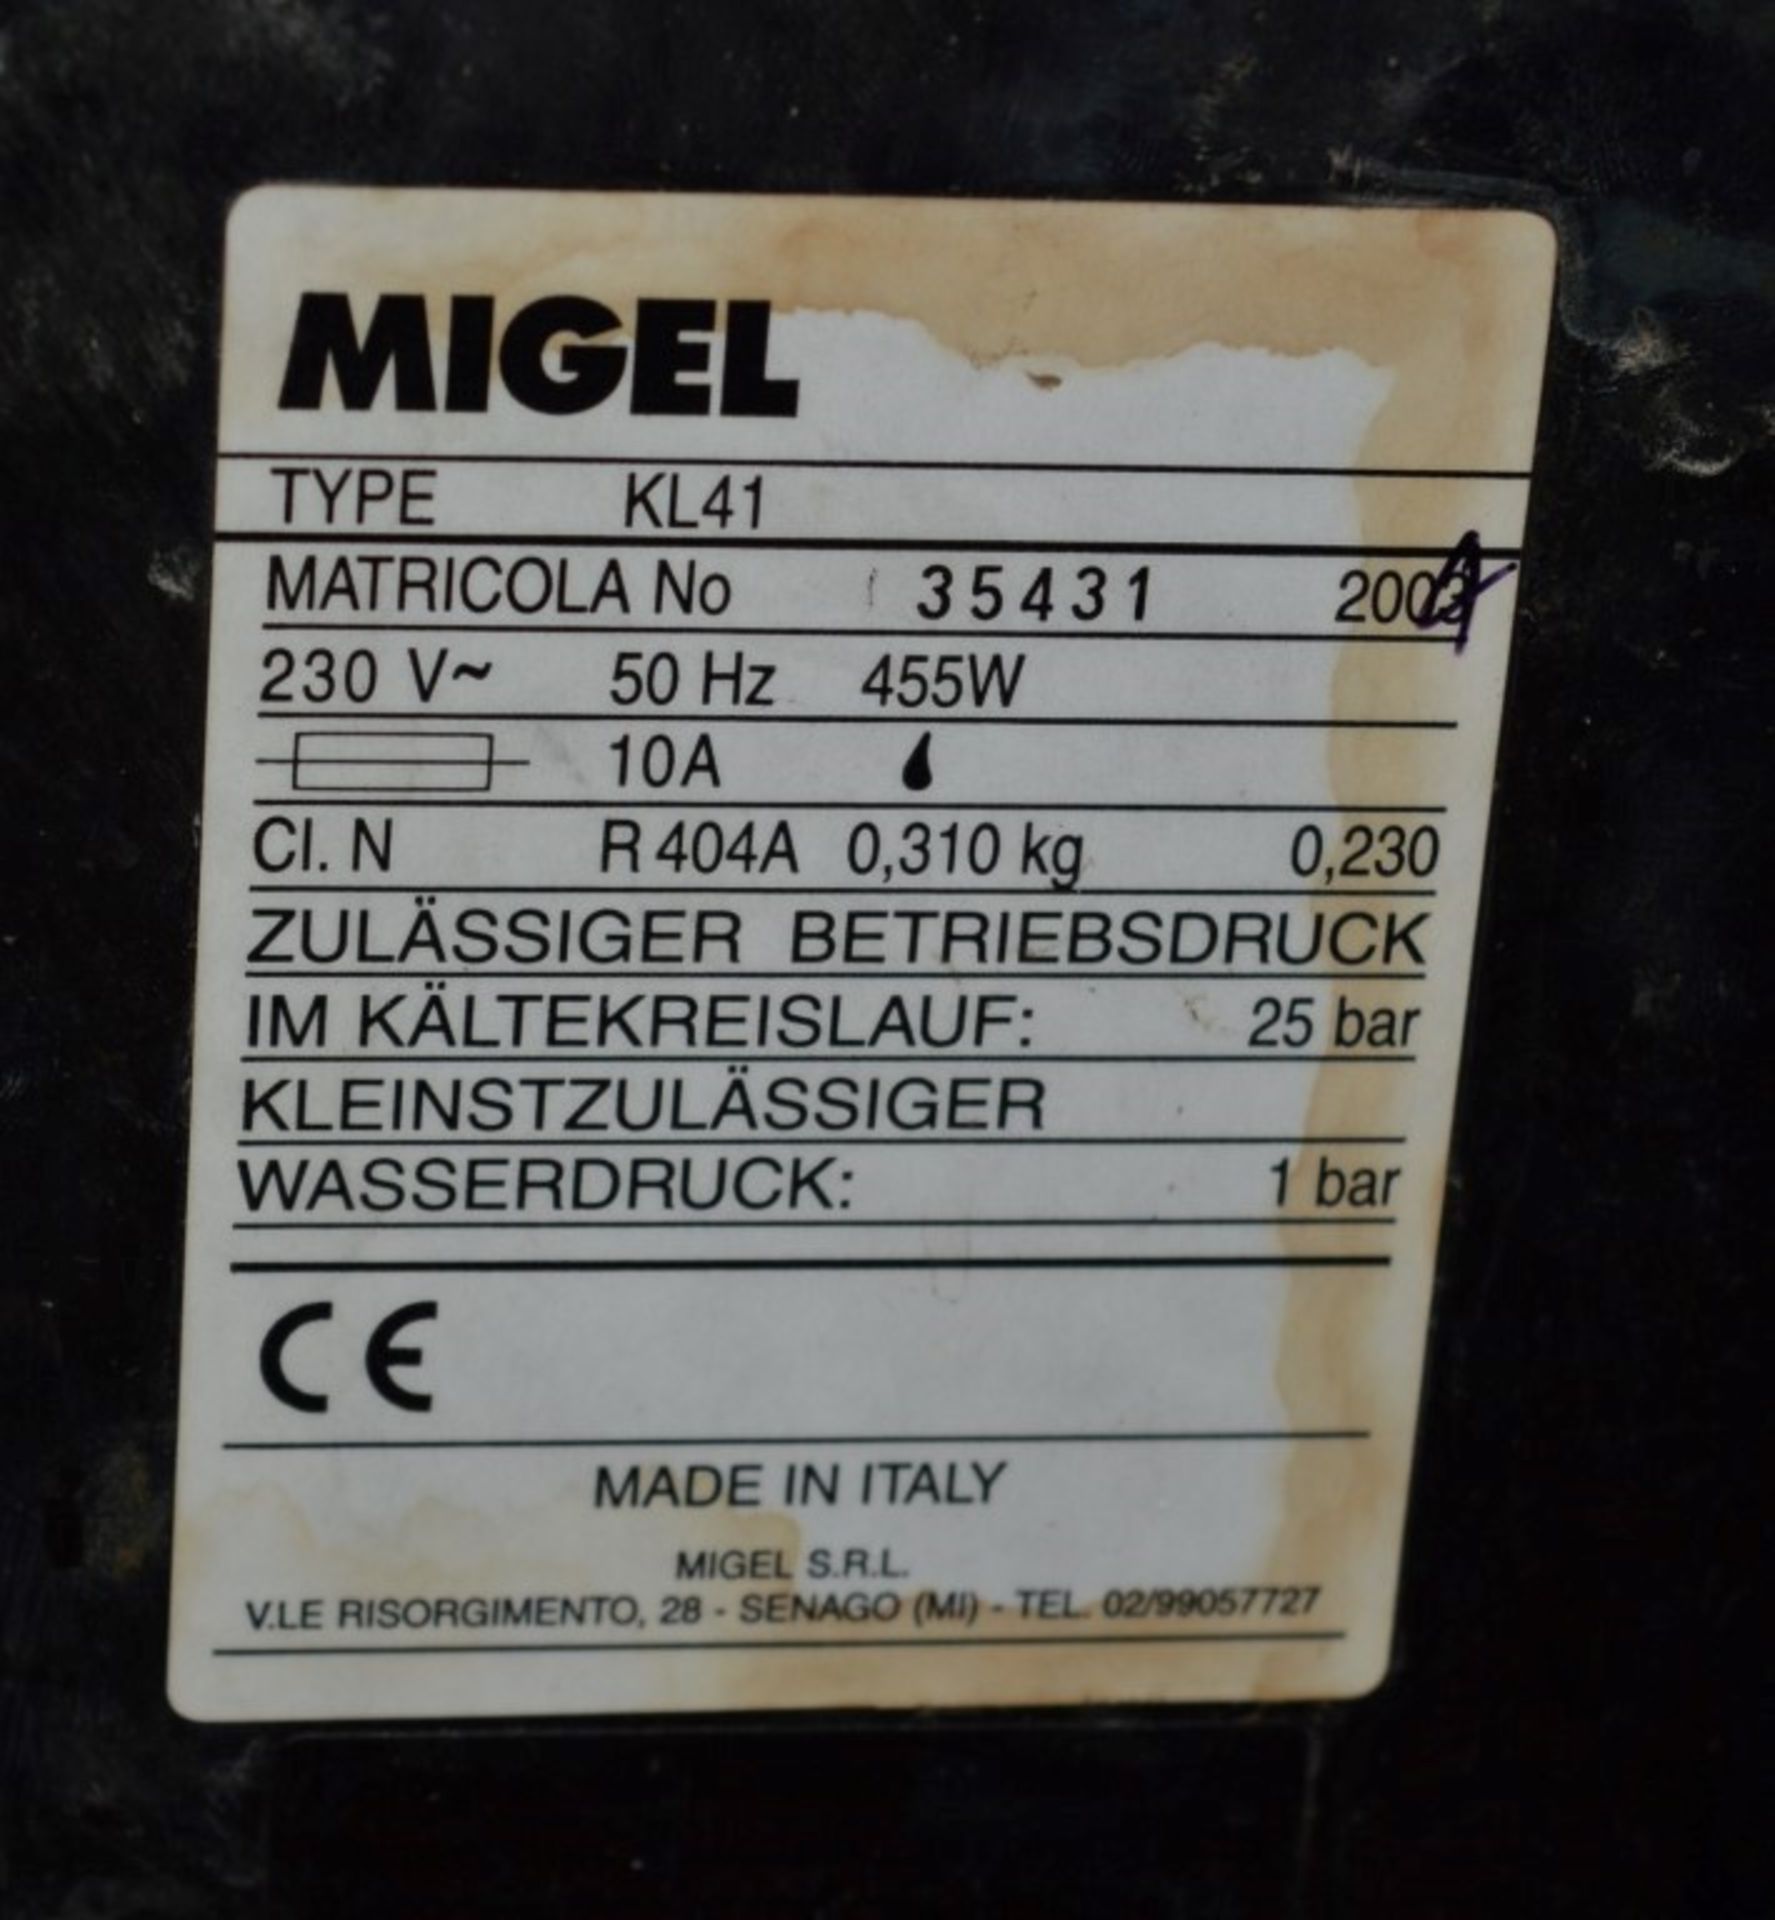 1 x Migel KL41 Ice Maker Machine - Stainless Steel Finish - For Commercial User - 50kg Capacity - - Image 5 of 6